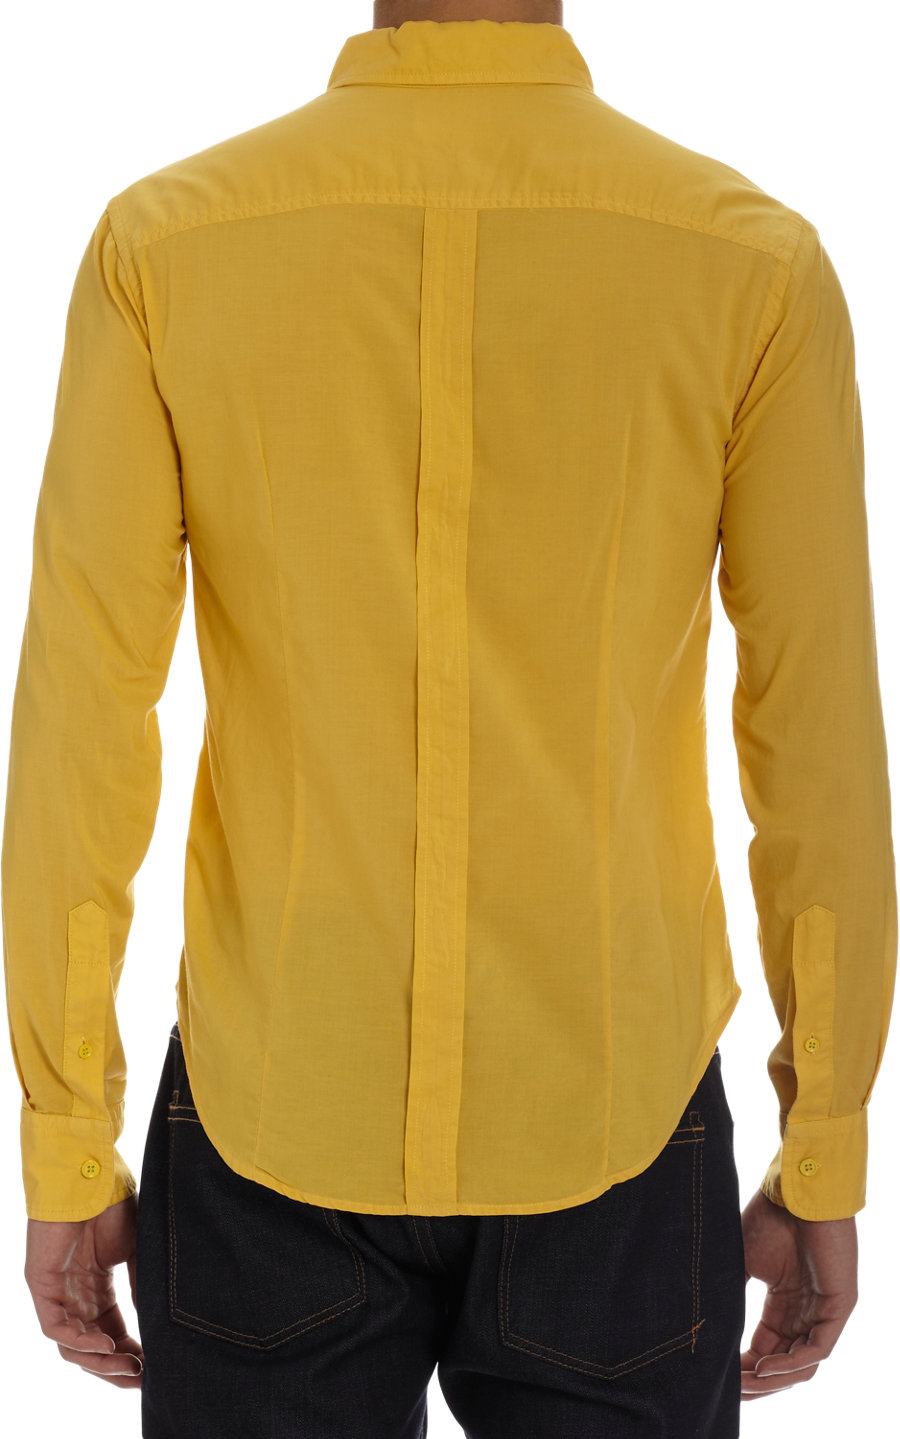 Band of outsiders Men's Solid Button Down Collar Shirt in Yellow for ...